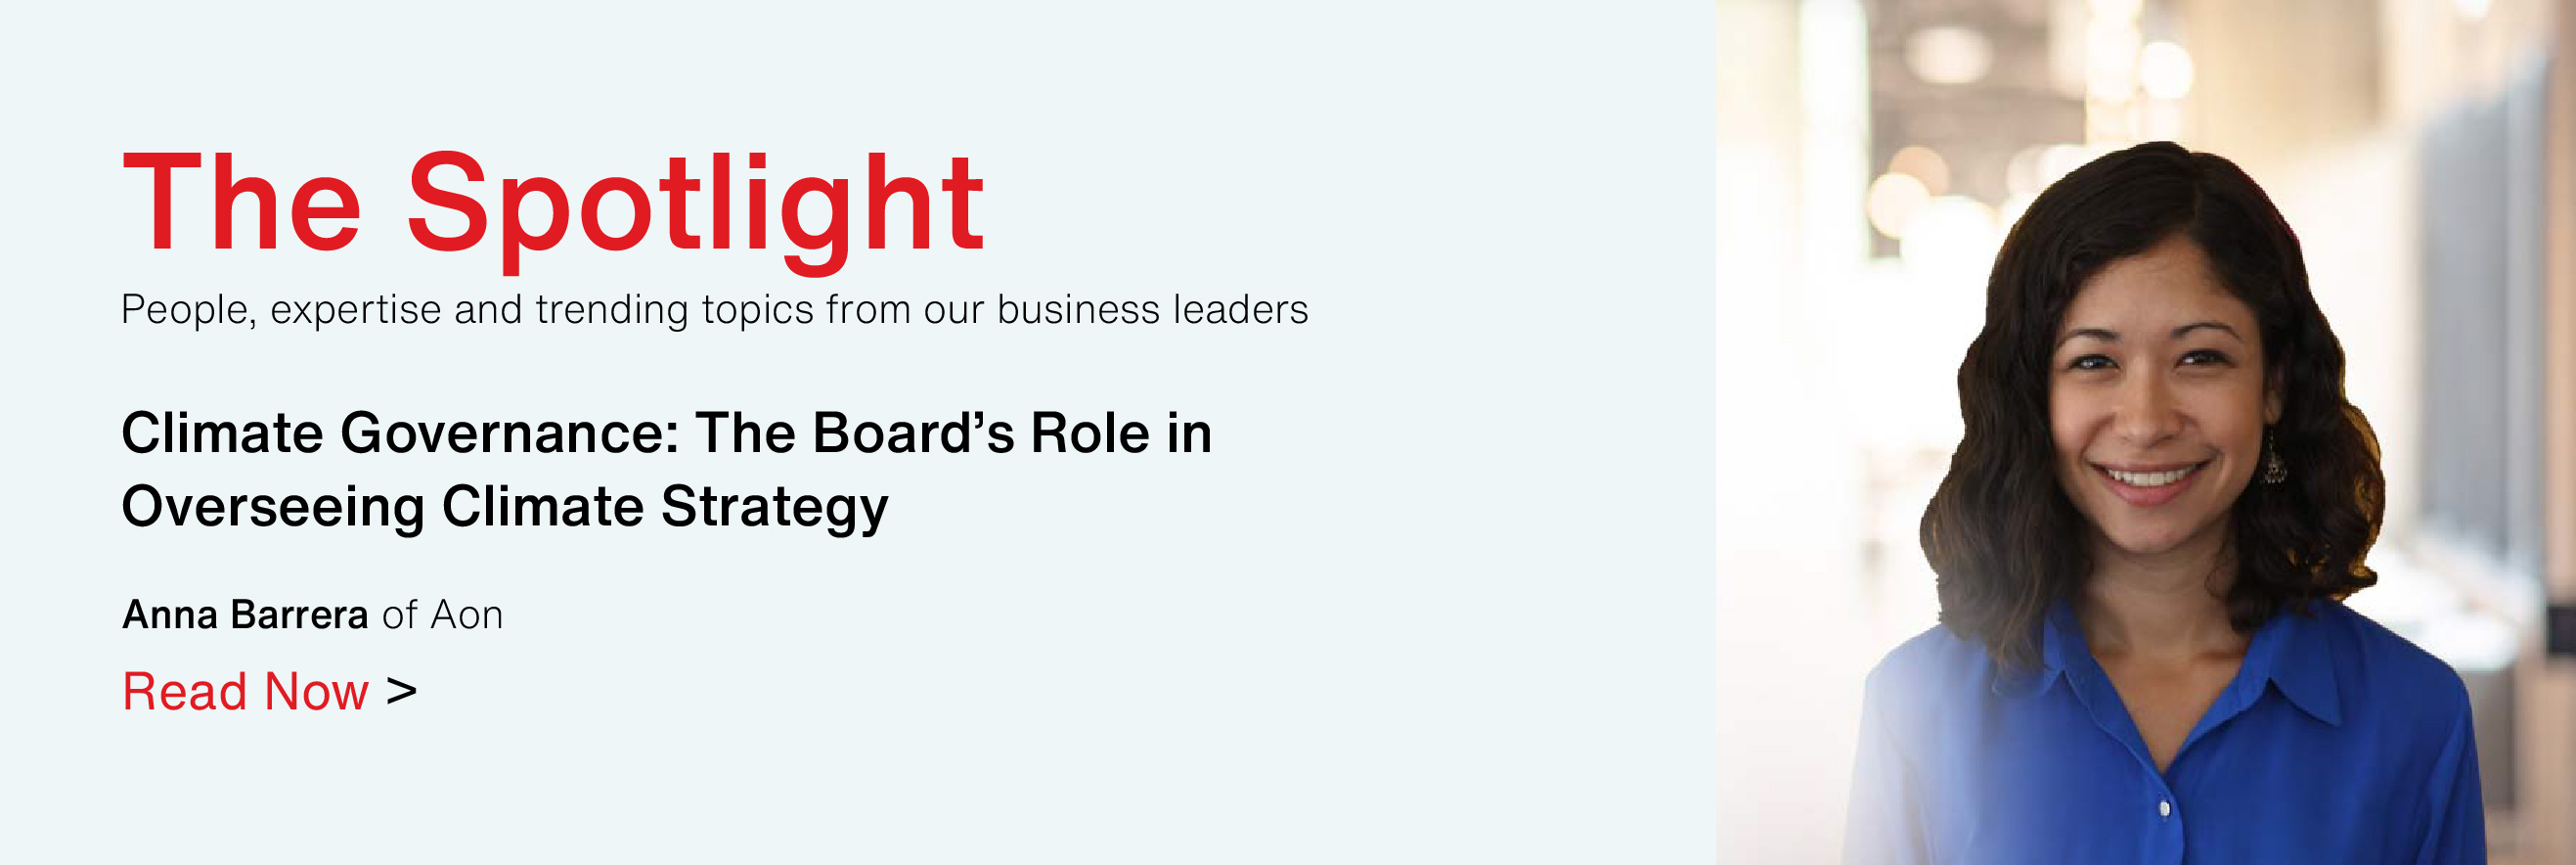 The Spotlight: Climate Governance: The Board's Role in Overseeing Climate Strategy - Anna Barrera of Aon - Read Now >